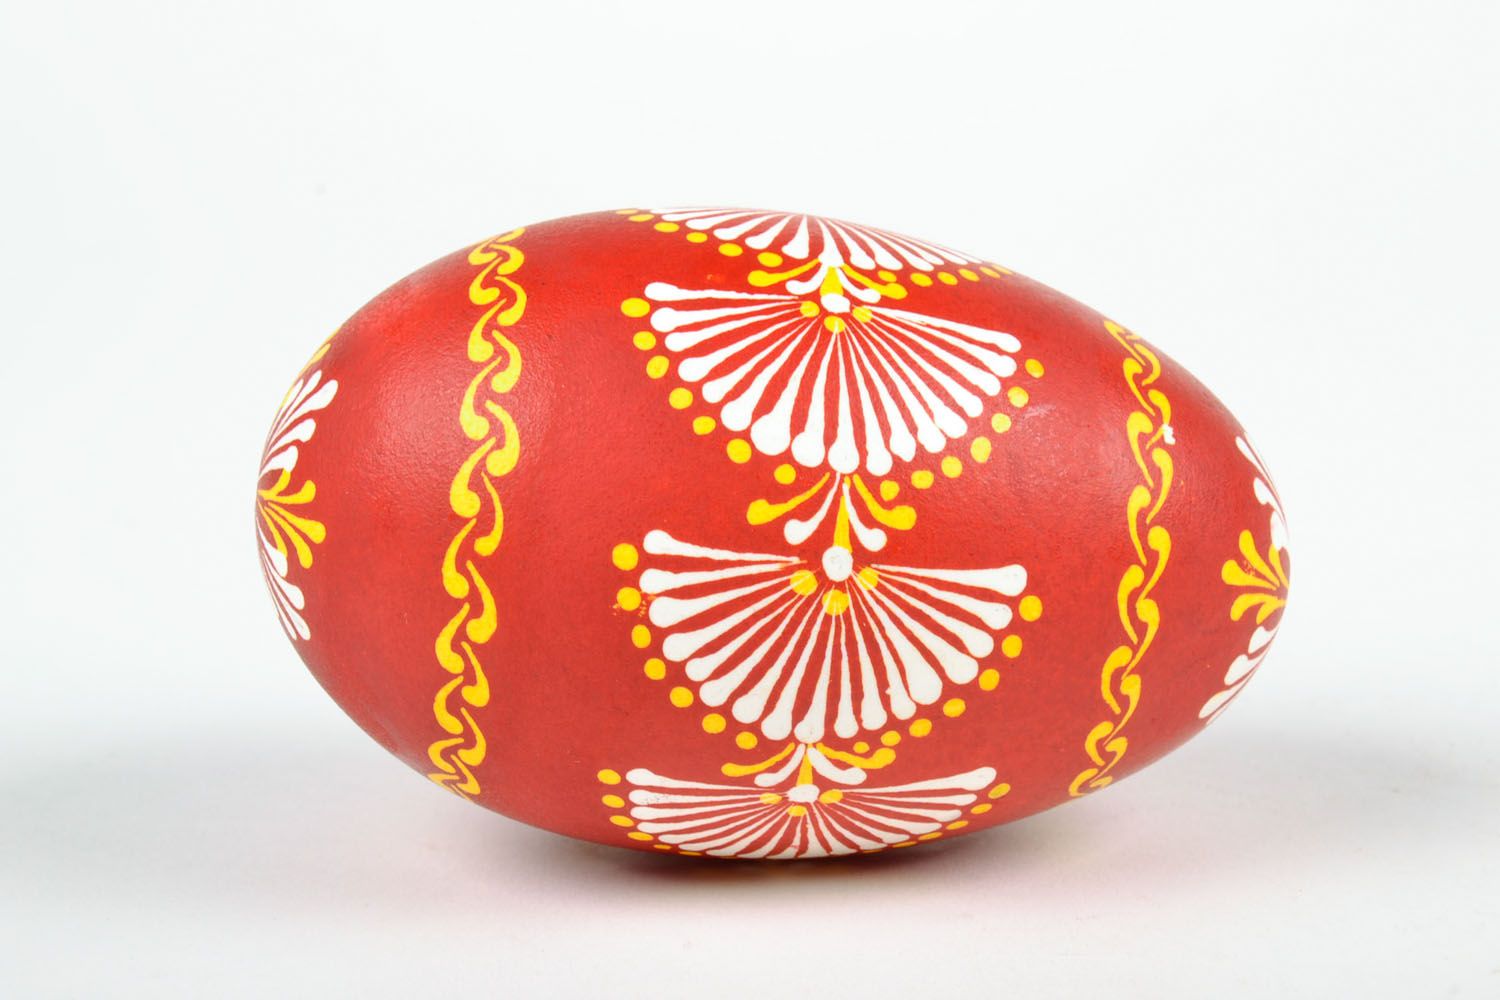 Painted goose egg photo 5